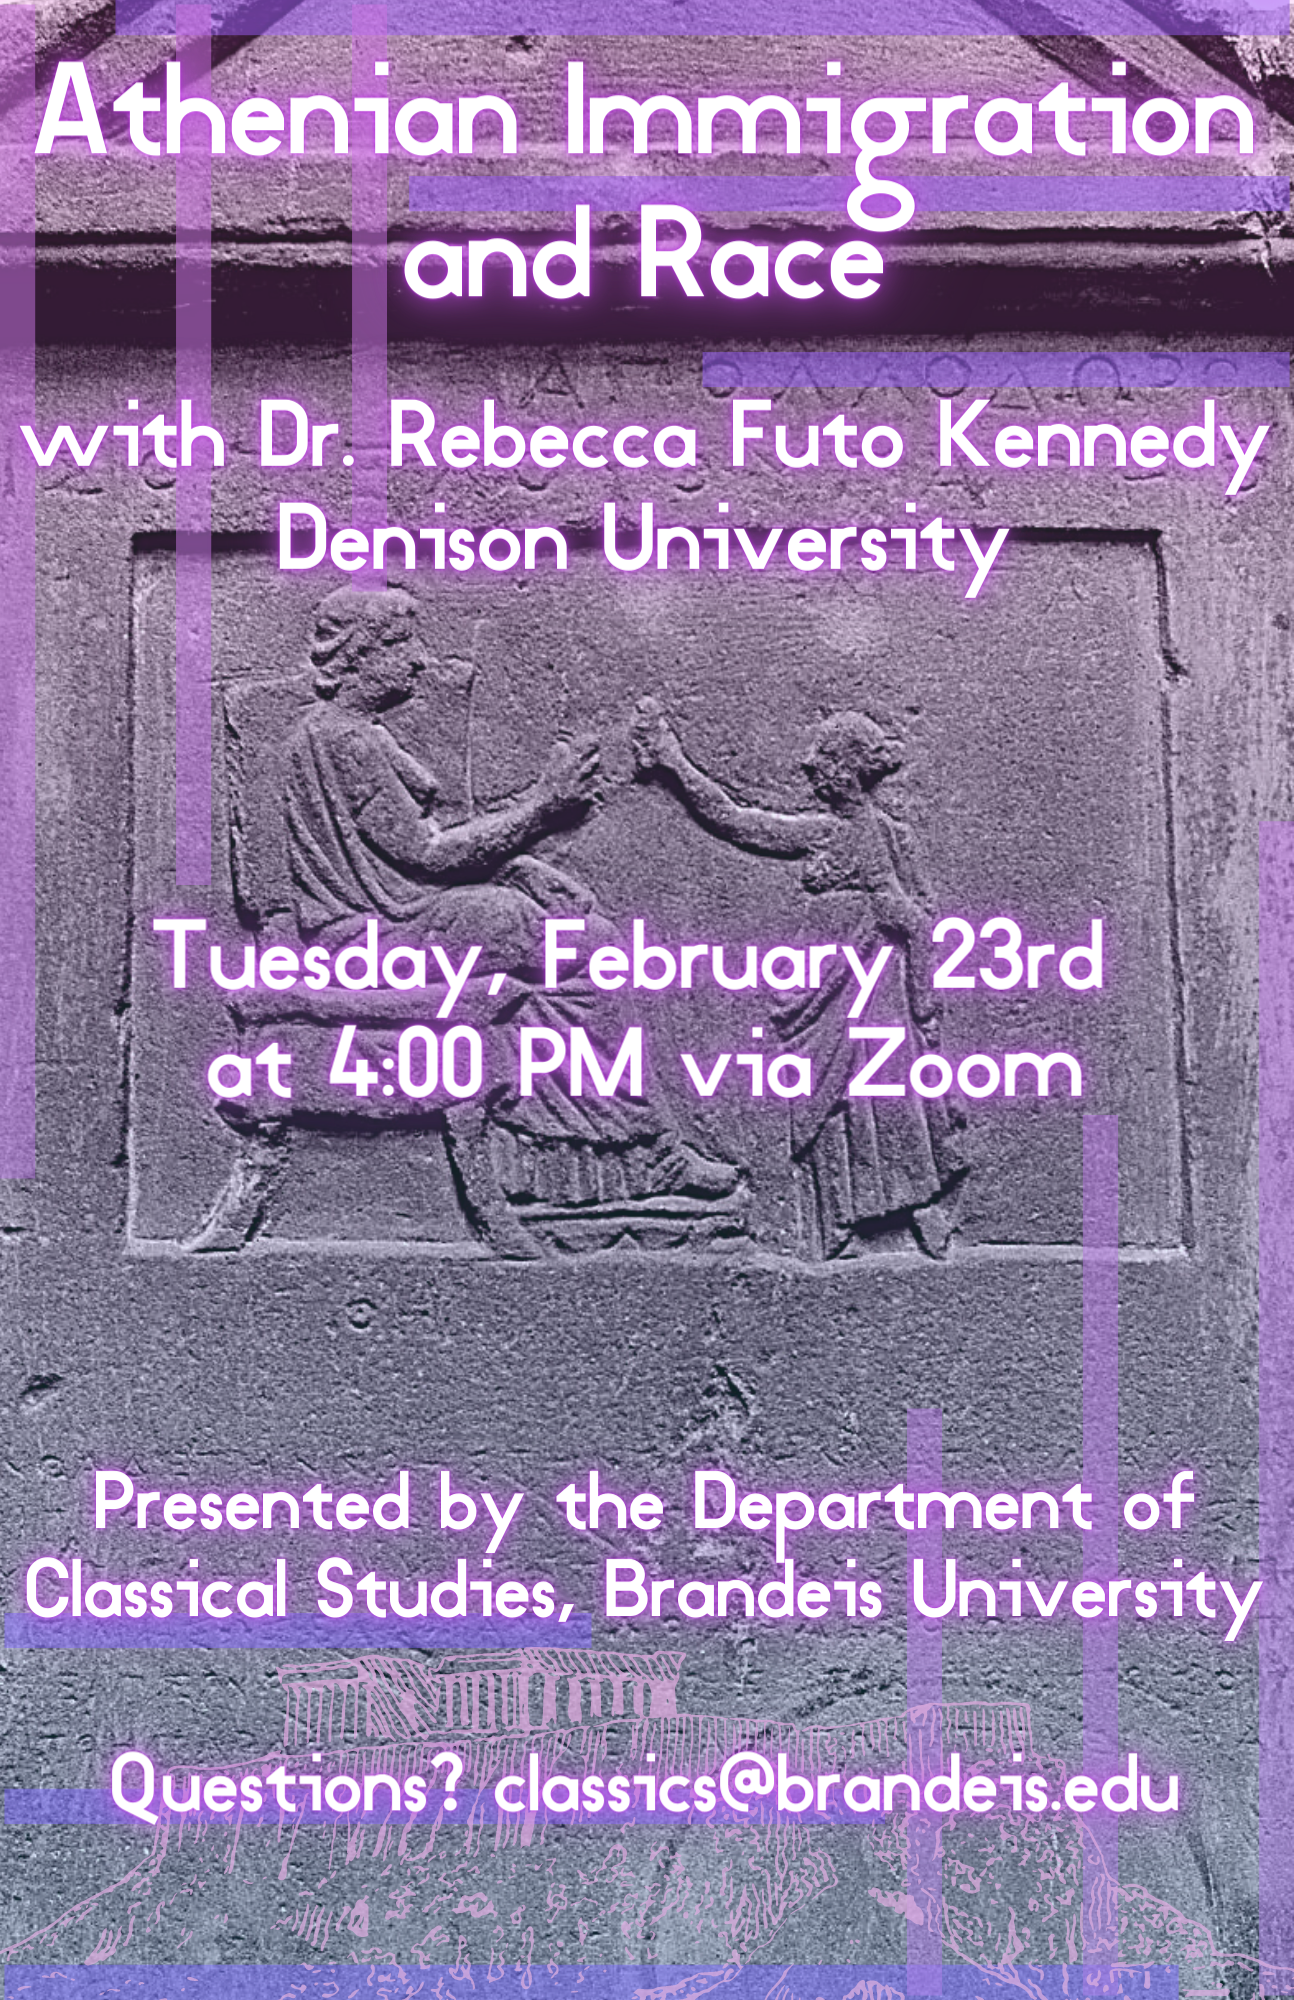 Digital Flyer for "Athenian Immigration and Race" with Dr. Rebecca Futo Kennedy